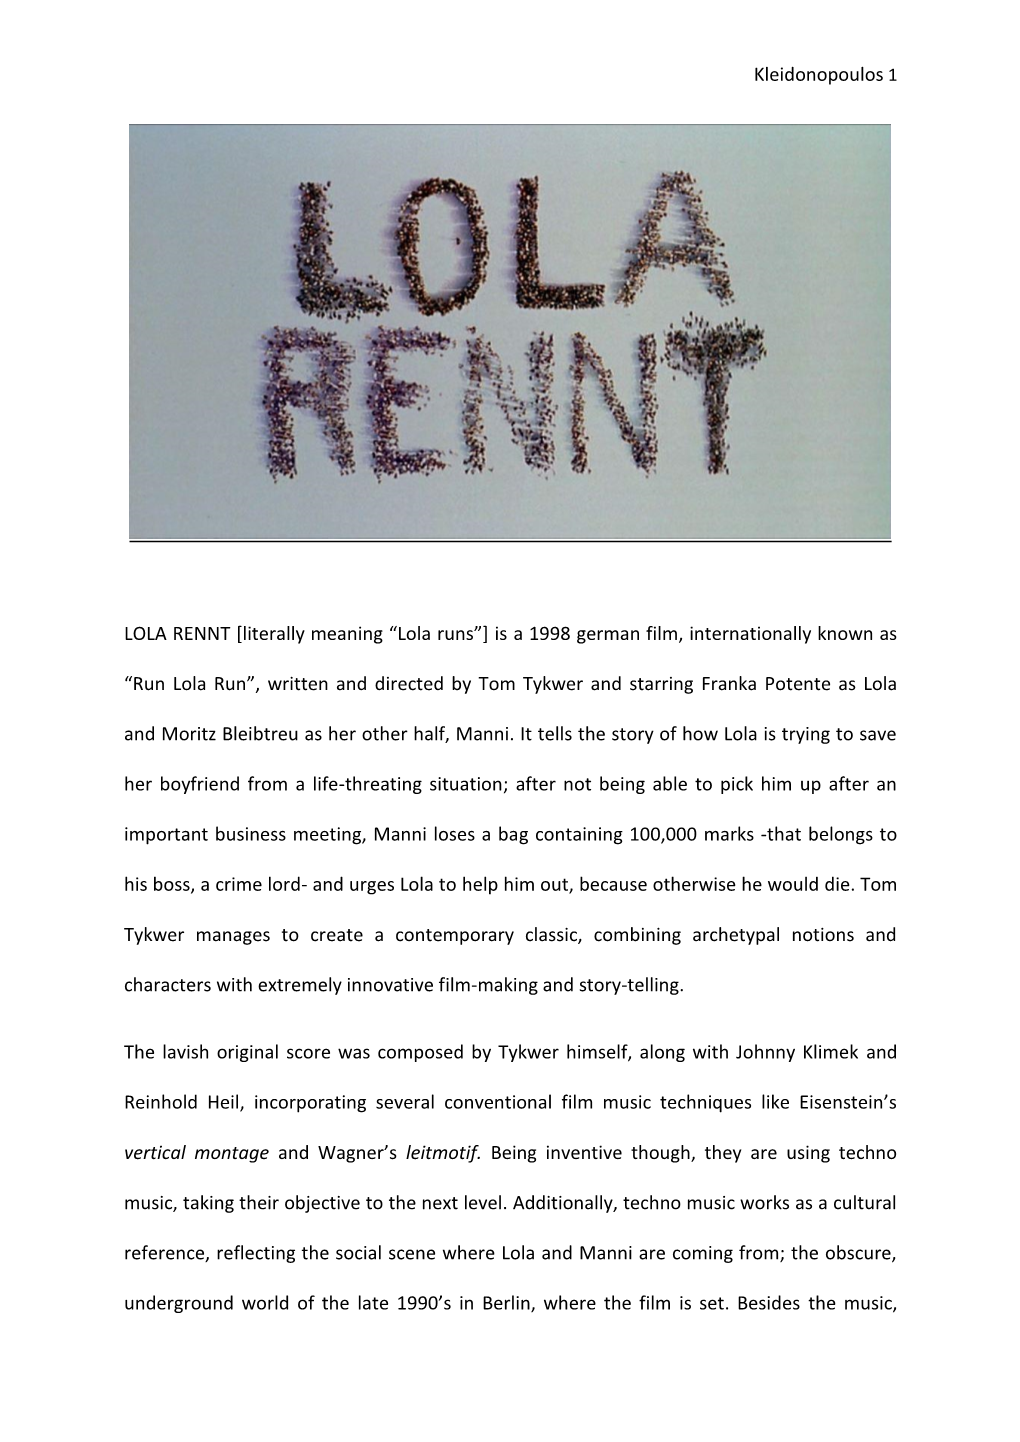 Kleidonopoulos 1 LOLA RENNT [Literally Meaning “Lola Runs”] Is A